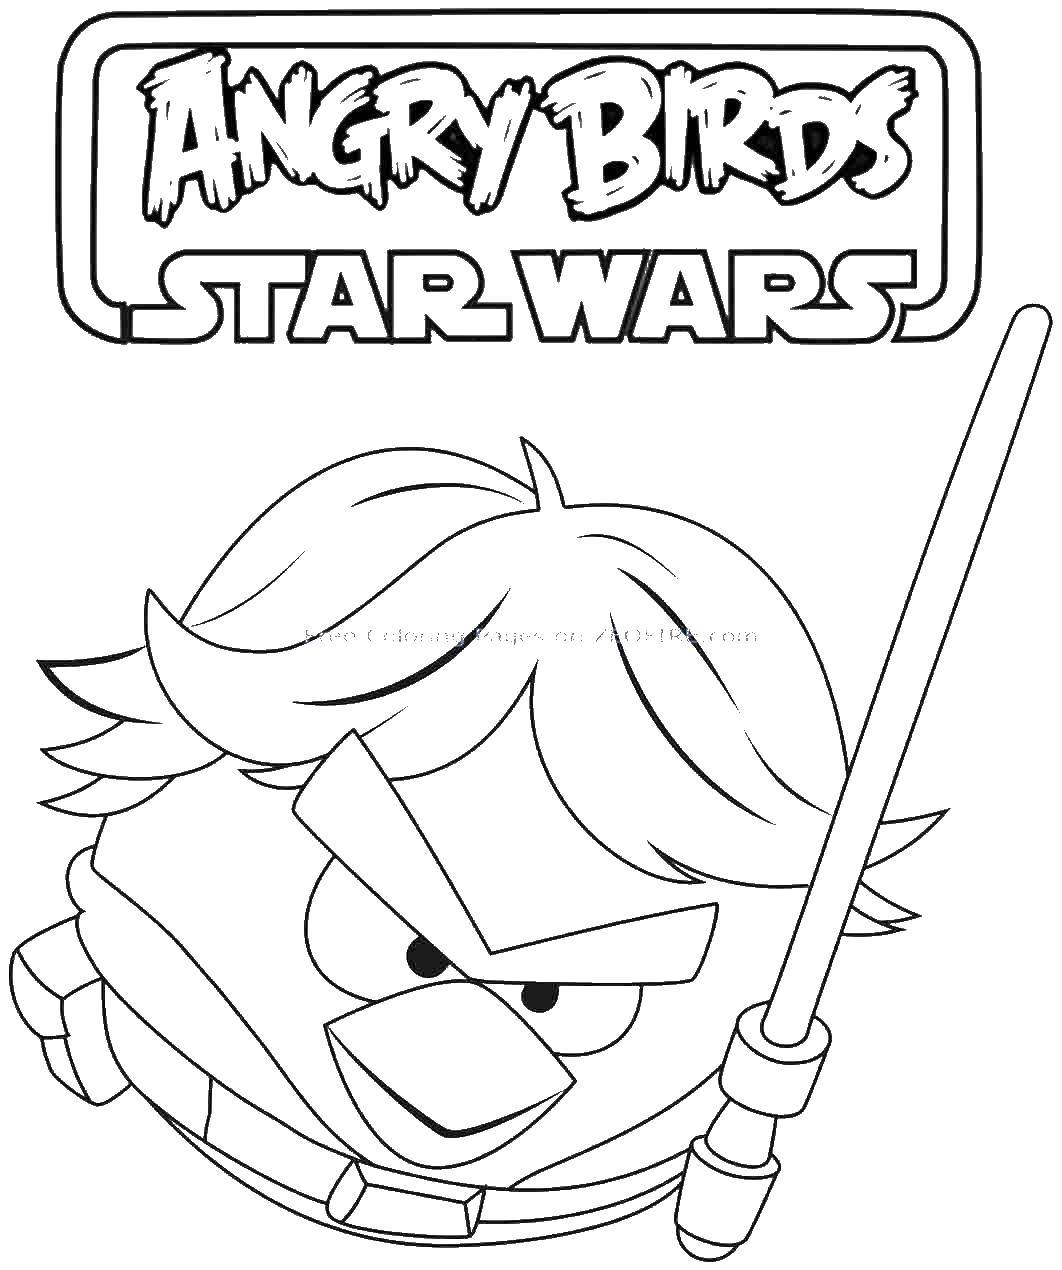 Coloring A bird with a sword. Category angry birds. Tags:  angry birds, bird, sword.